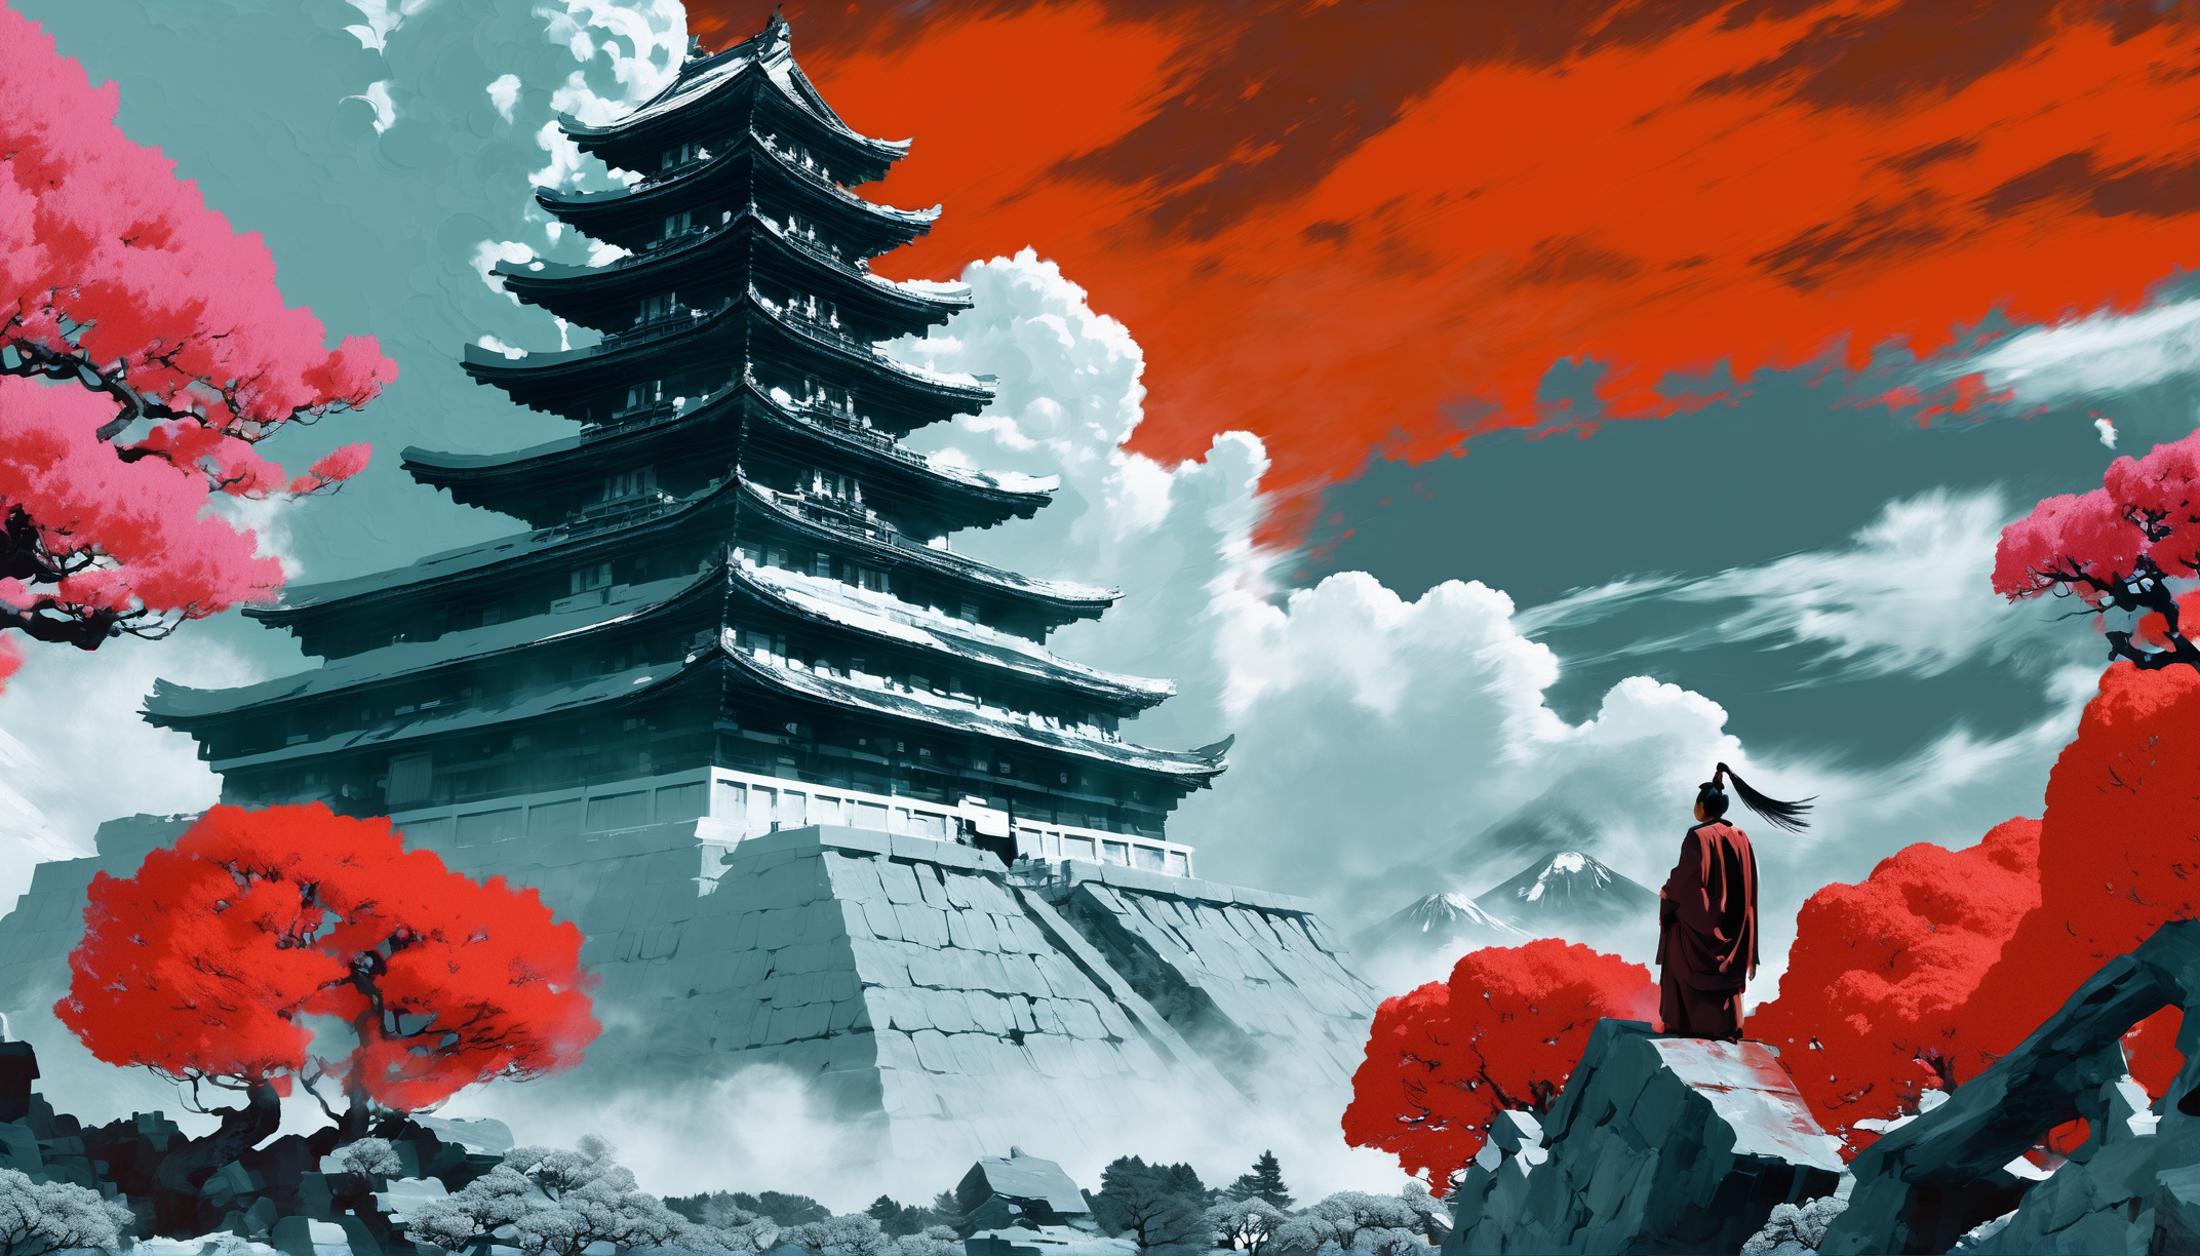 Ancient Chinese Temple with Red and White Clouds in the Sky